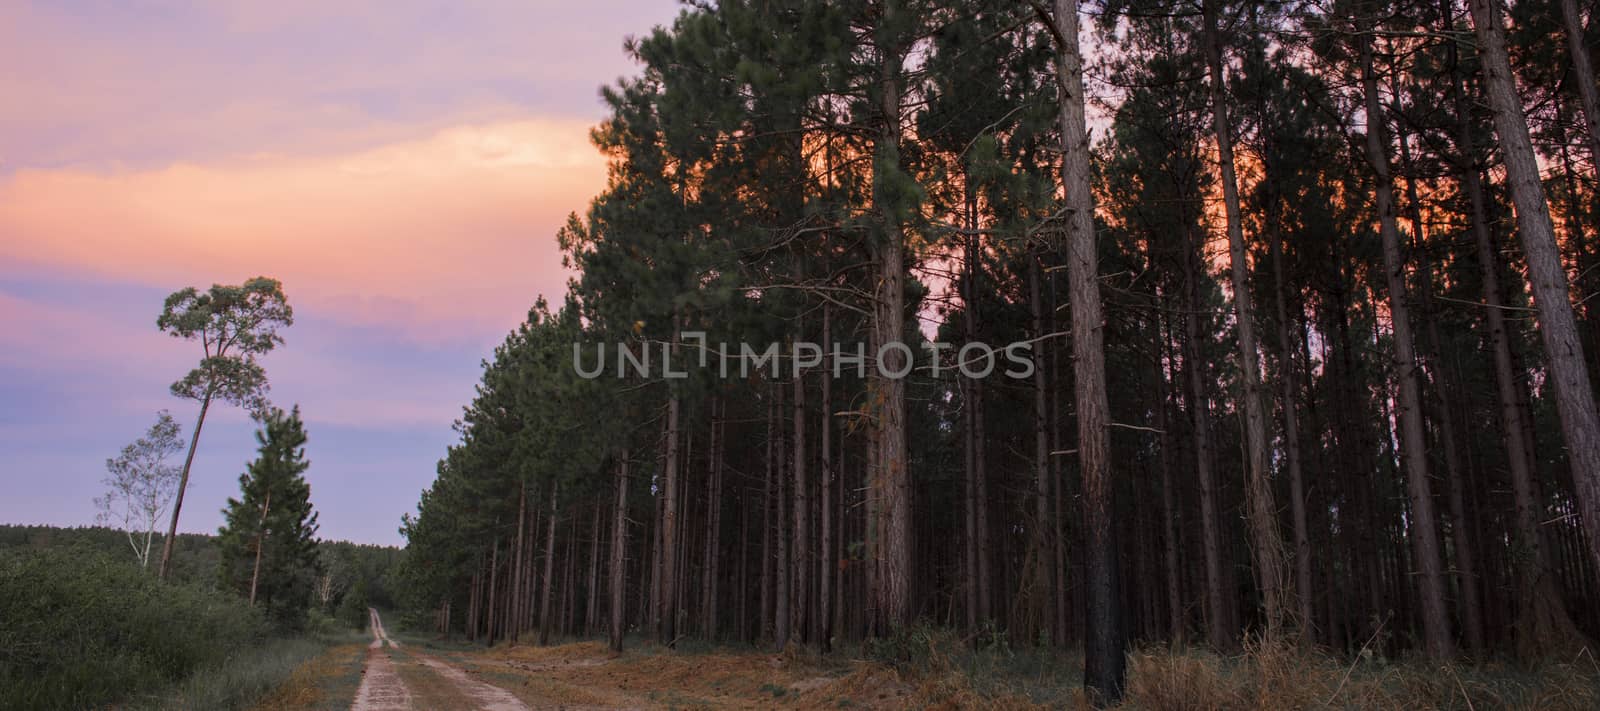 Pine tree forest in the late afternoon in the Sunshine Coast, Queensland.